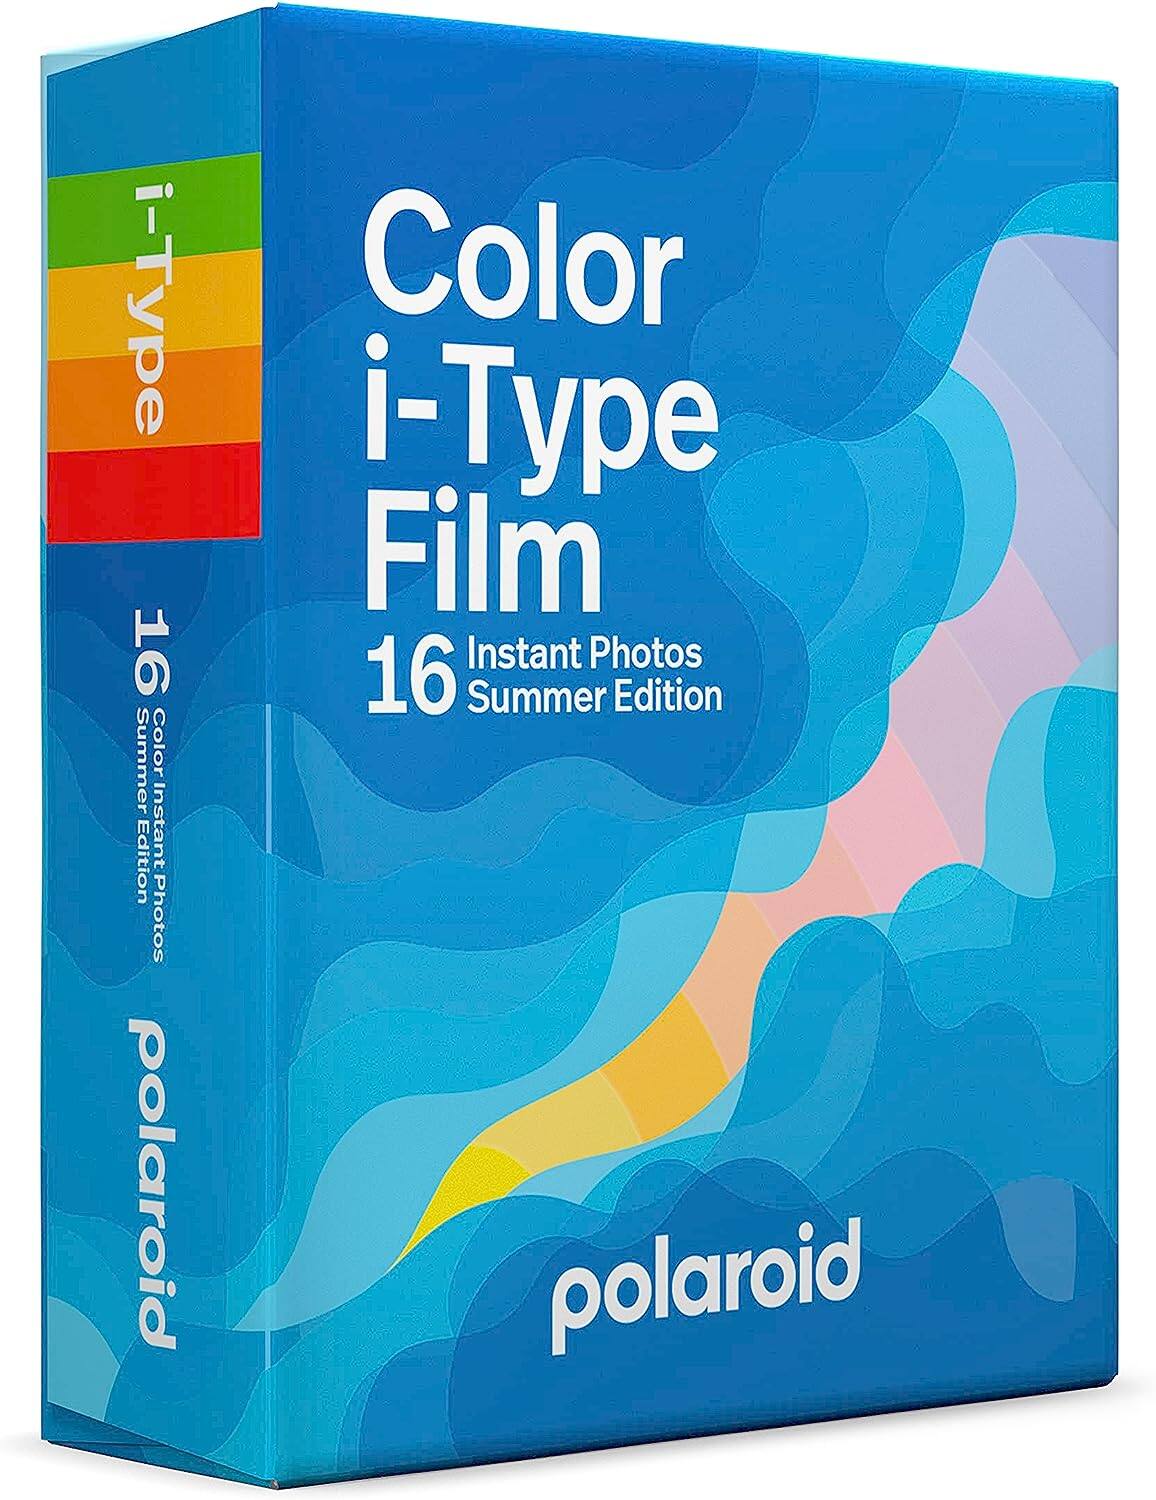 Polaroid Color i-Type Film Double Pack - Summer Edition Retinex Edition Round  Frame - Double Pack (16 Photos)